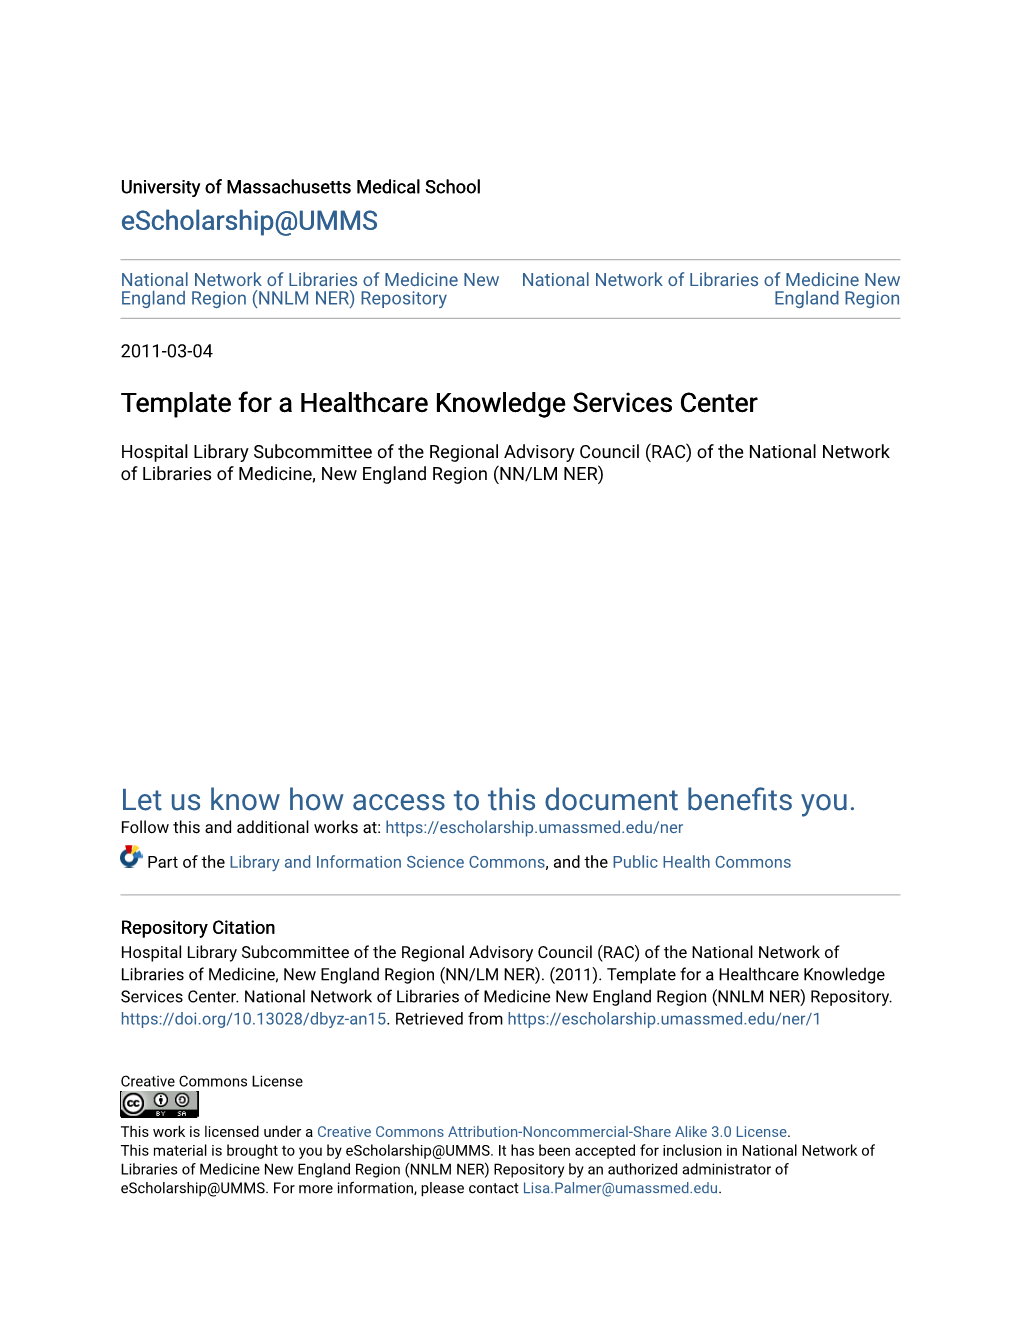 Template for a Healthcare Knowledge Services Center